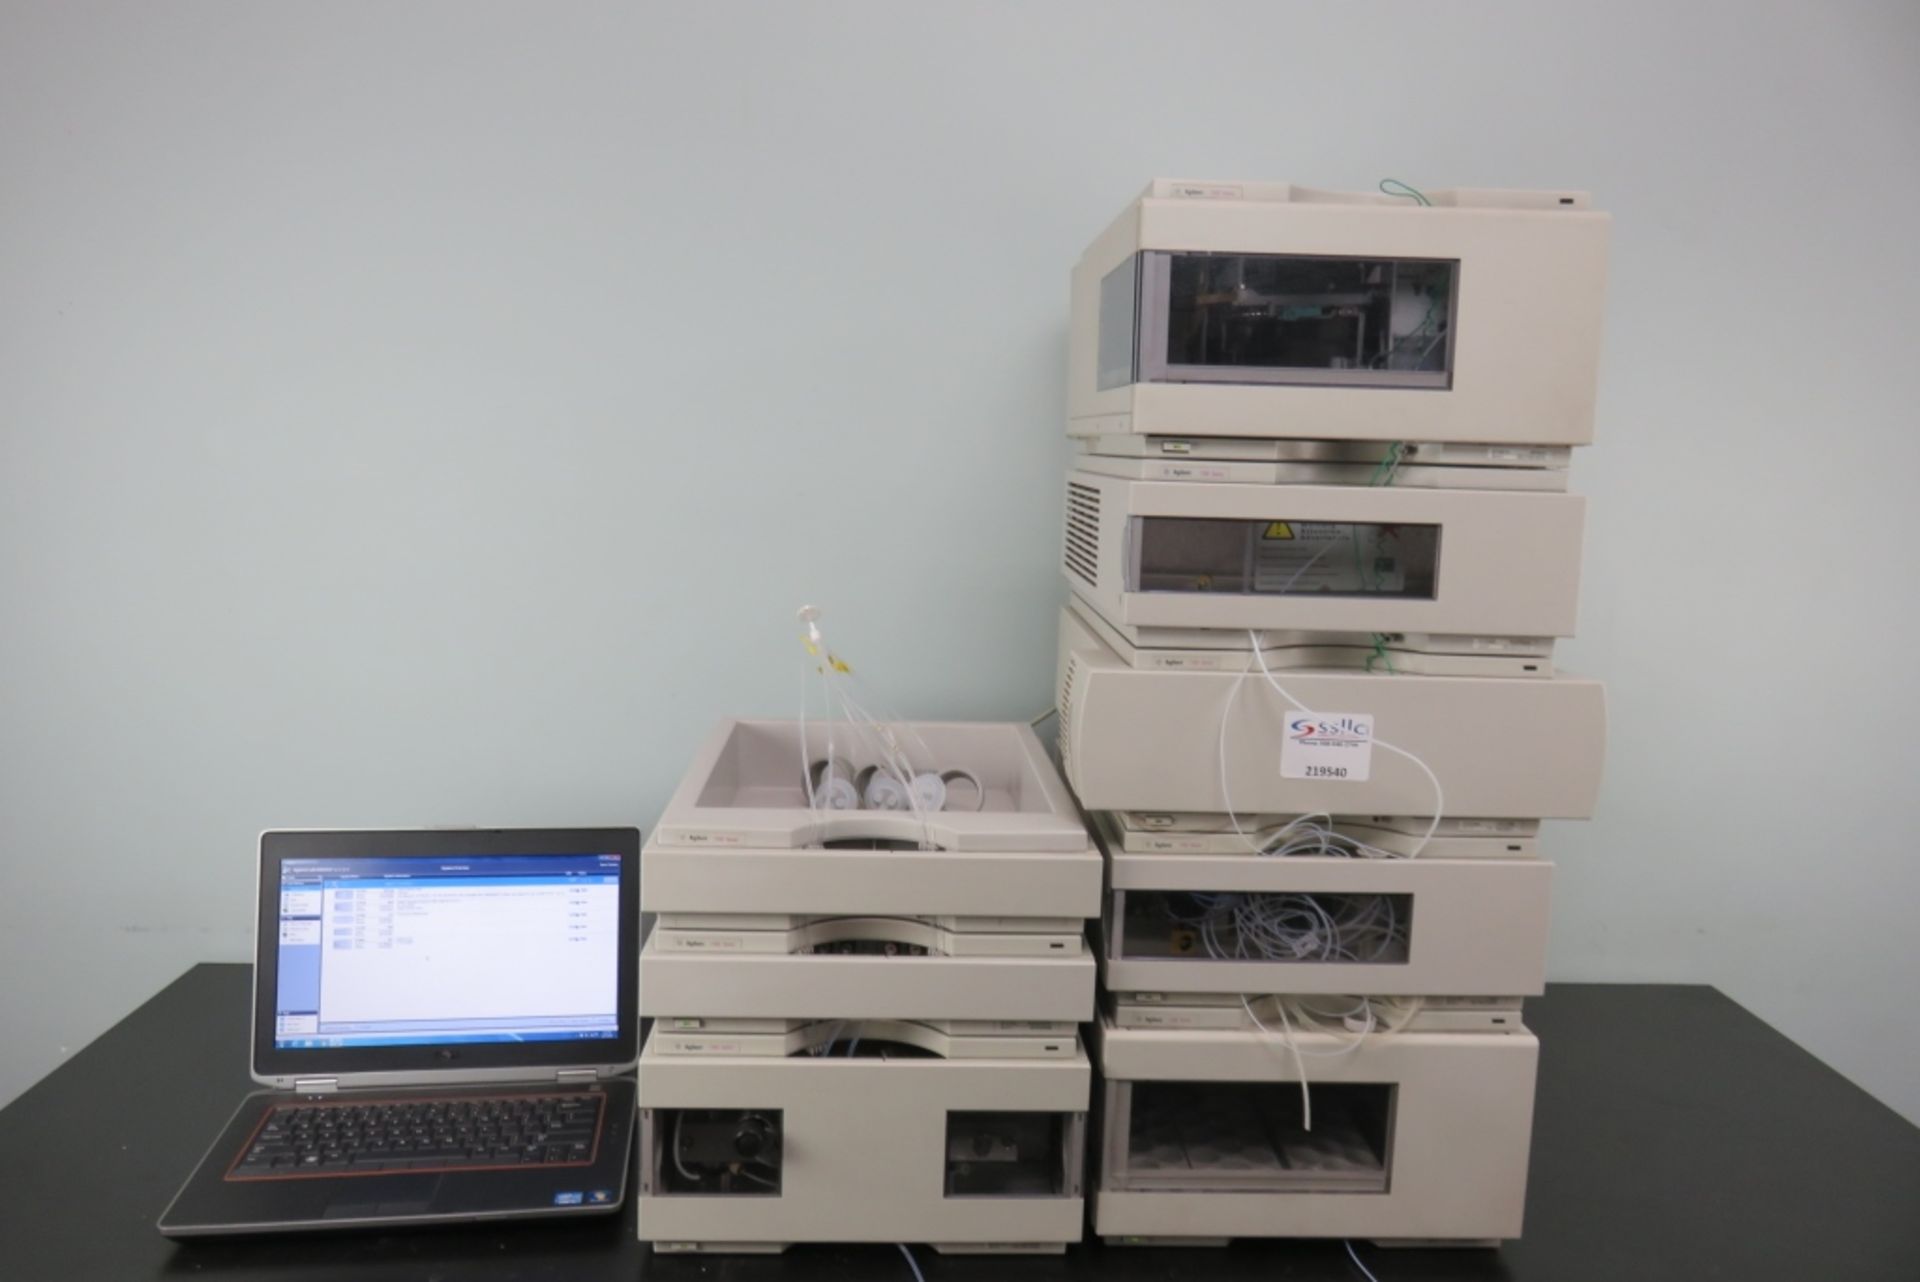 Agilent 1100 HPLC System with DAD Detector